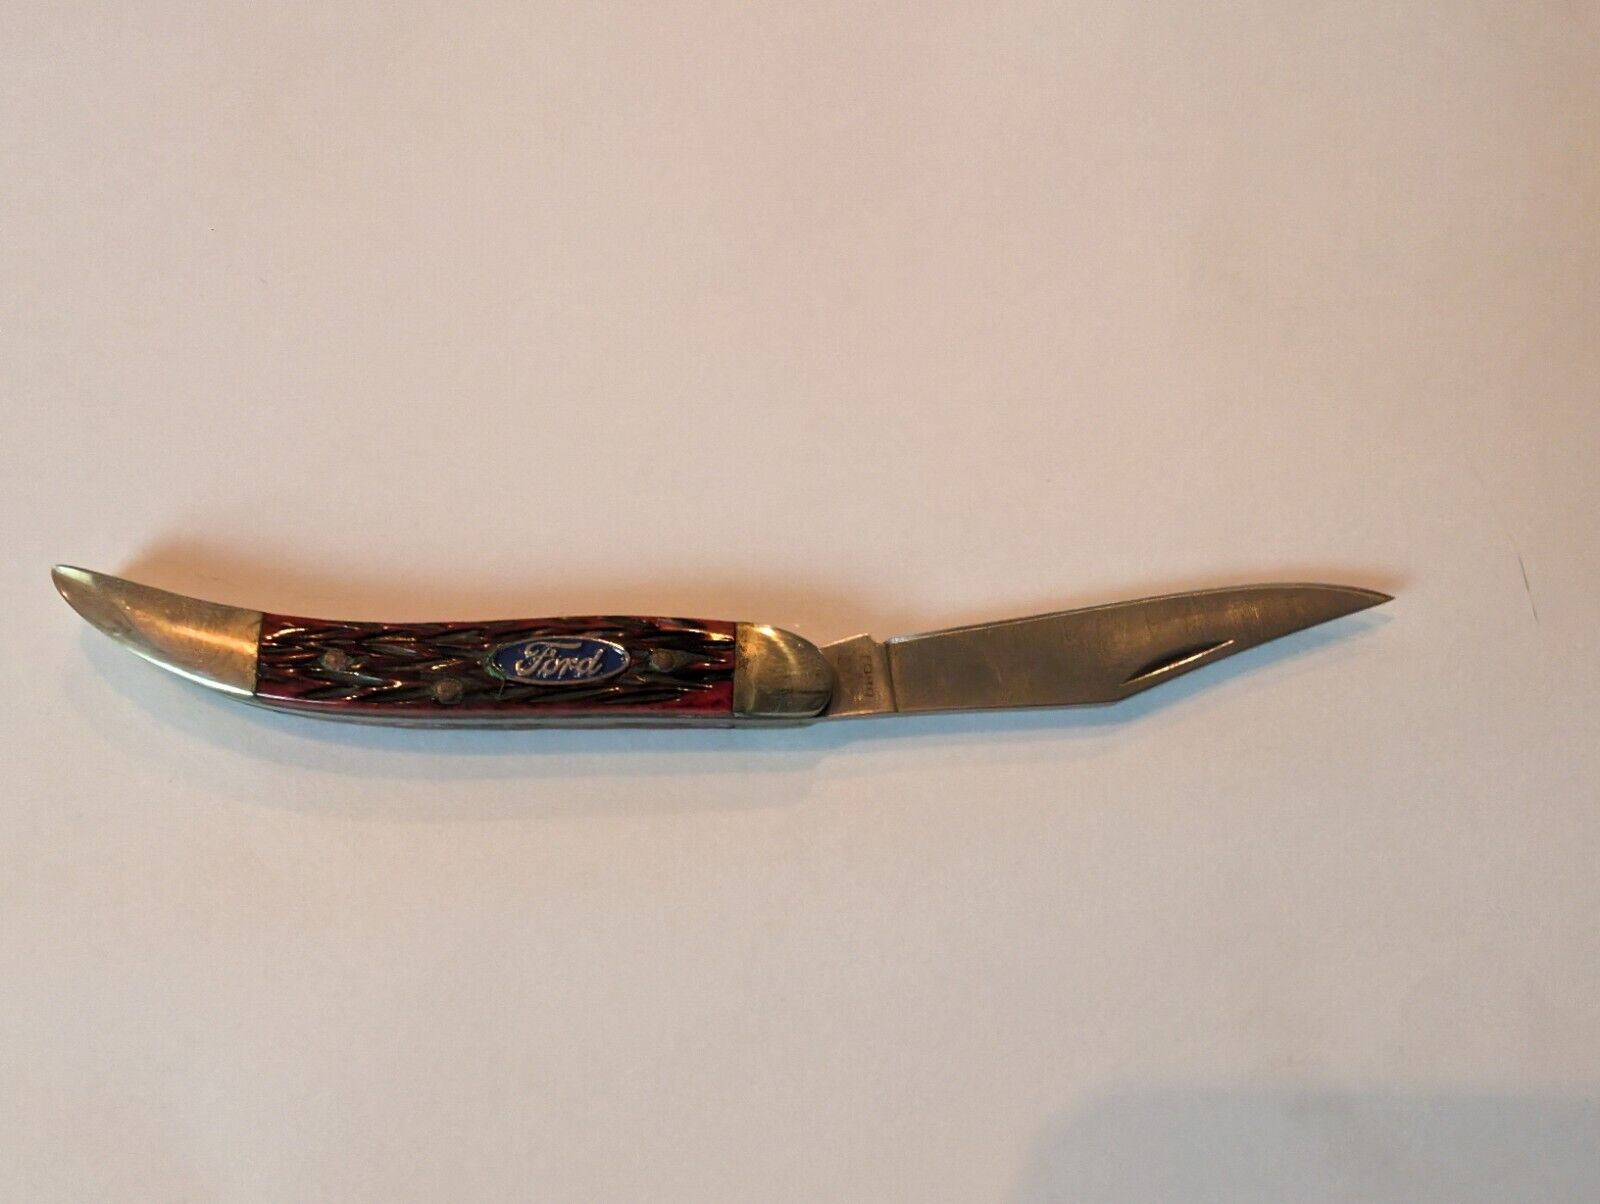 Vintage Ford Small Folding Knife Extremely Rare Excellent Condition 2117